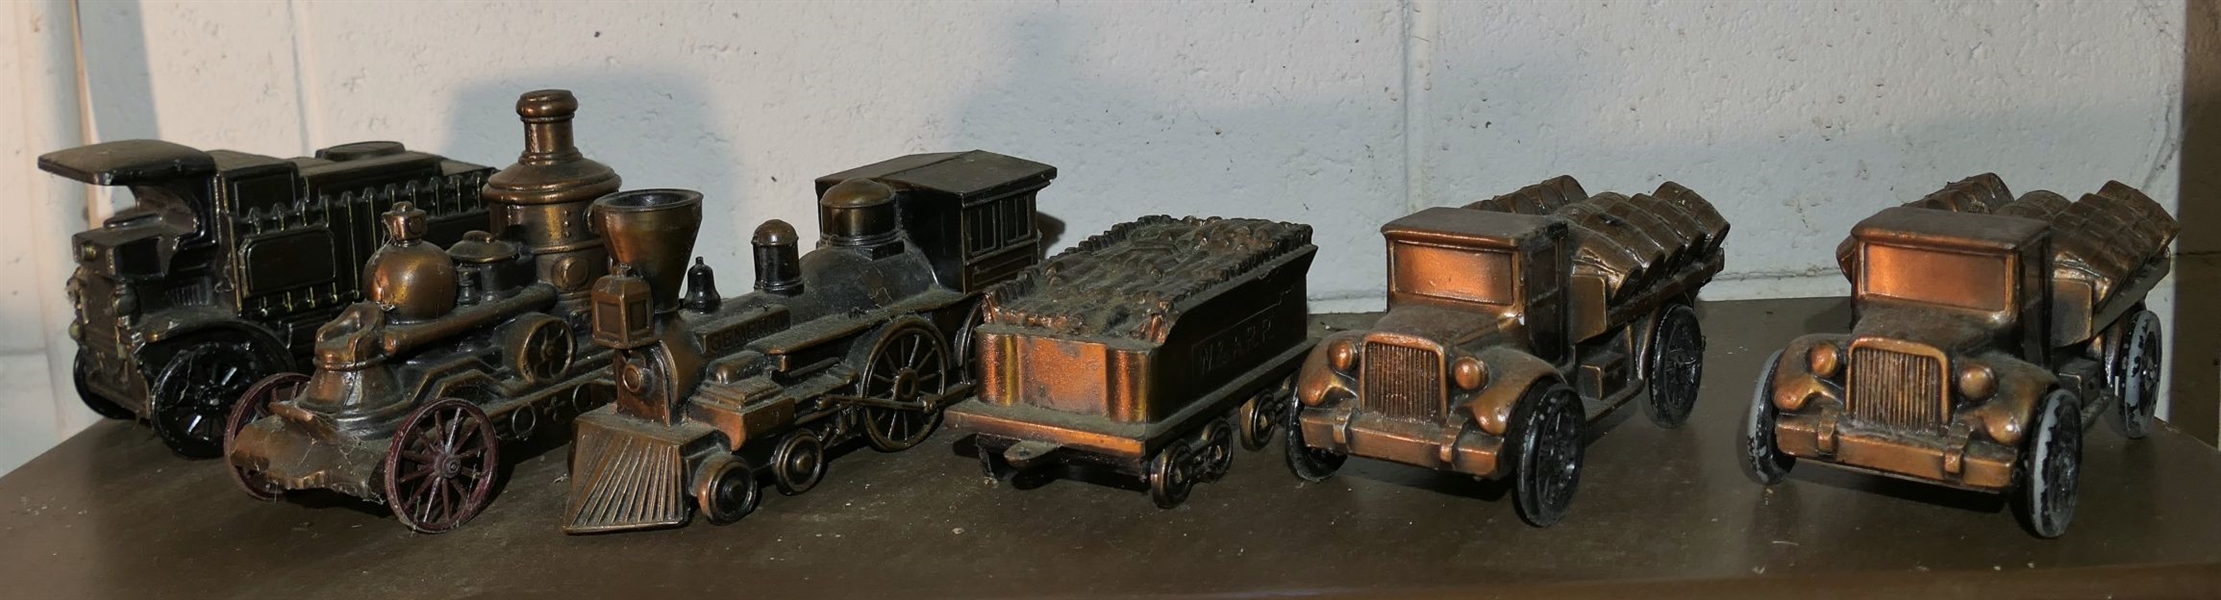 6 Metal Car, Vehicle, and Engine Banks including Hamilton Bank Train Engine, 2 - 1922 Corbitt and Others - Banks Made by Banthrico